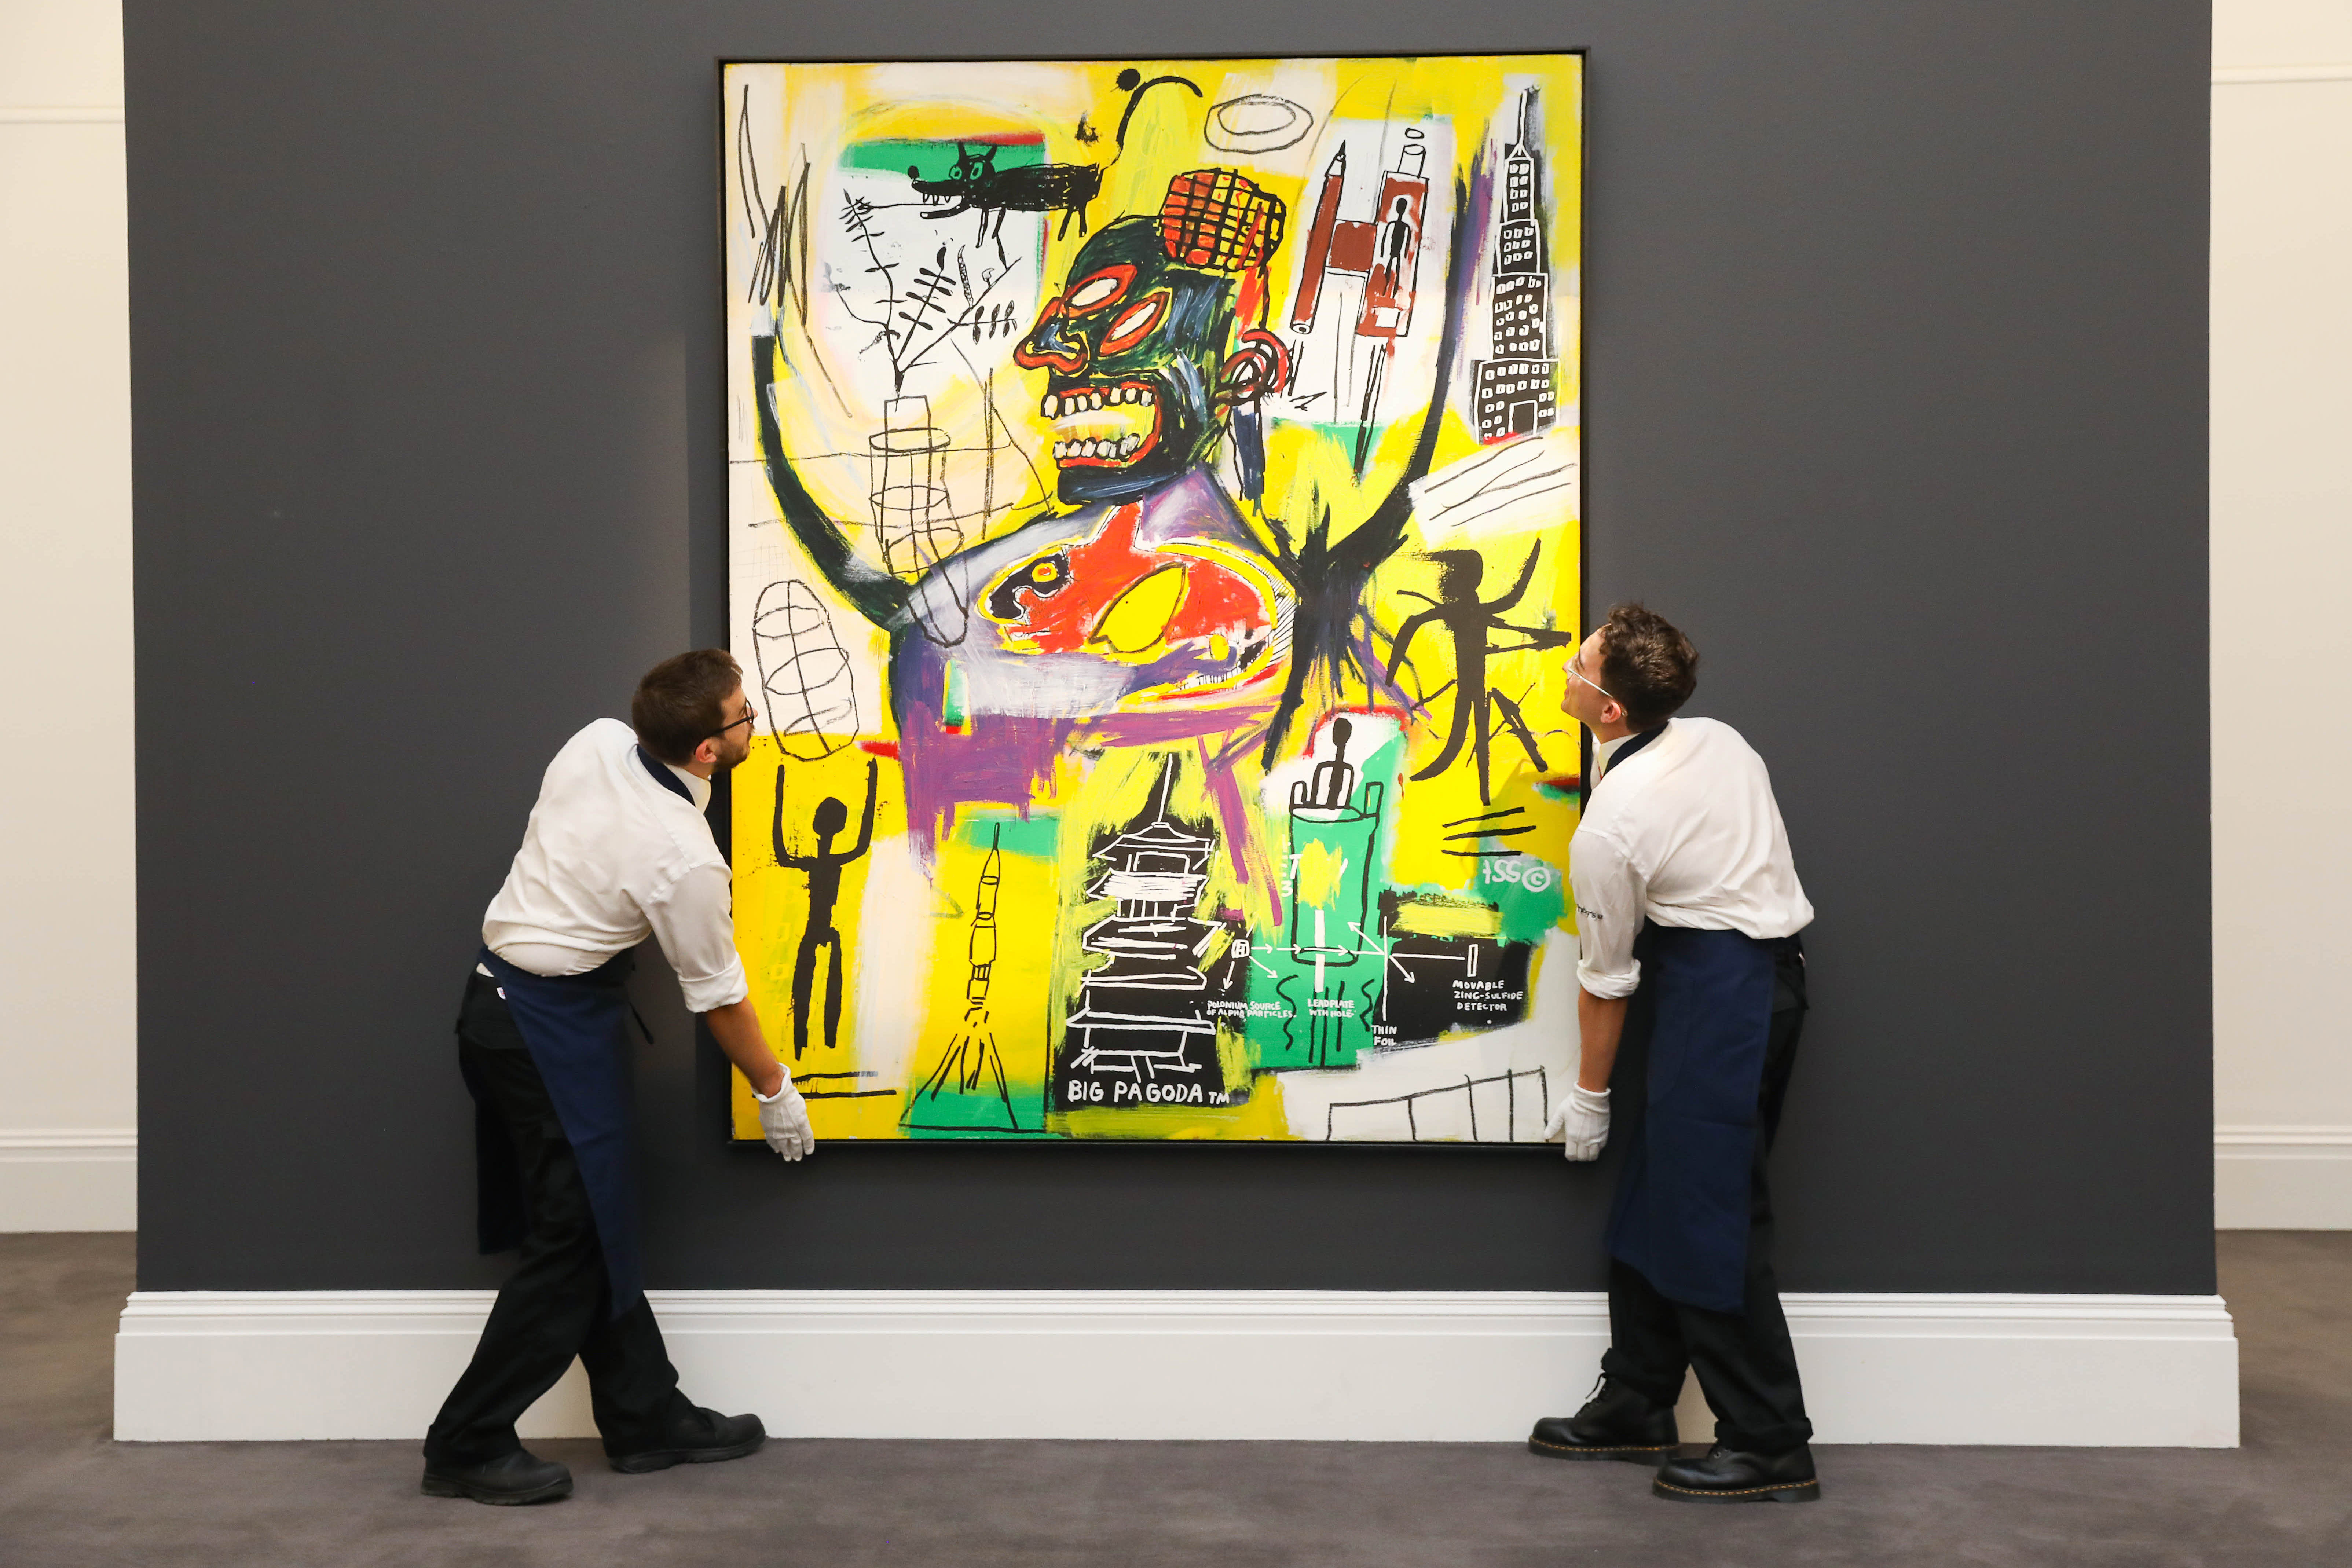 There’s a ‘unique’ opportunity in art, which has beat the S&P 500 over 25 years, asset manager says